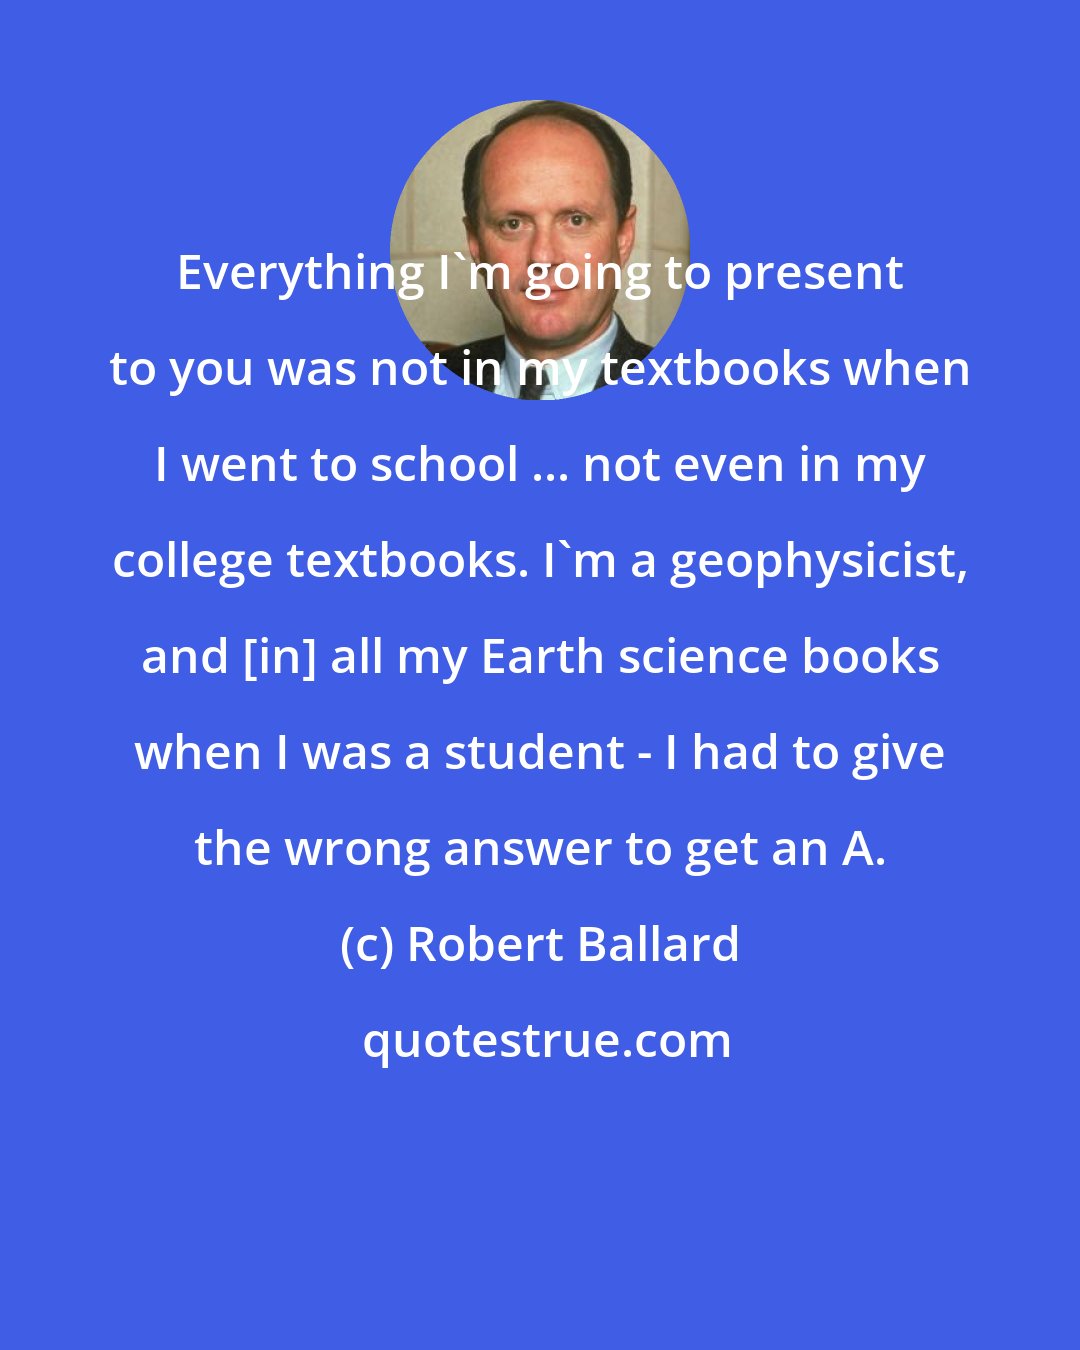 Robert Ballard: Everything I'm going to present to you was not in my textbooks when I went to school ... not even in my college textbooks. I'm a geophysicist, and [in] all my Earth science books when I was a student - I had to give the wrong answer to get an A.